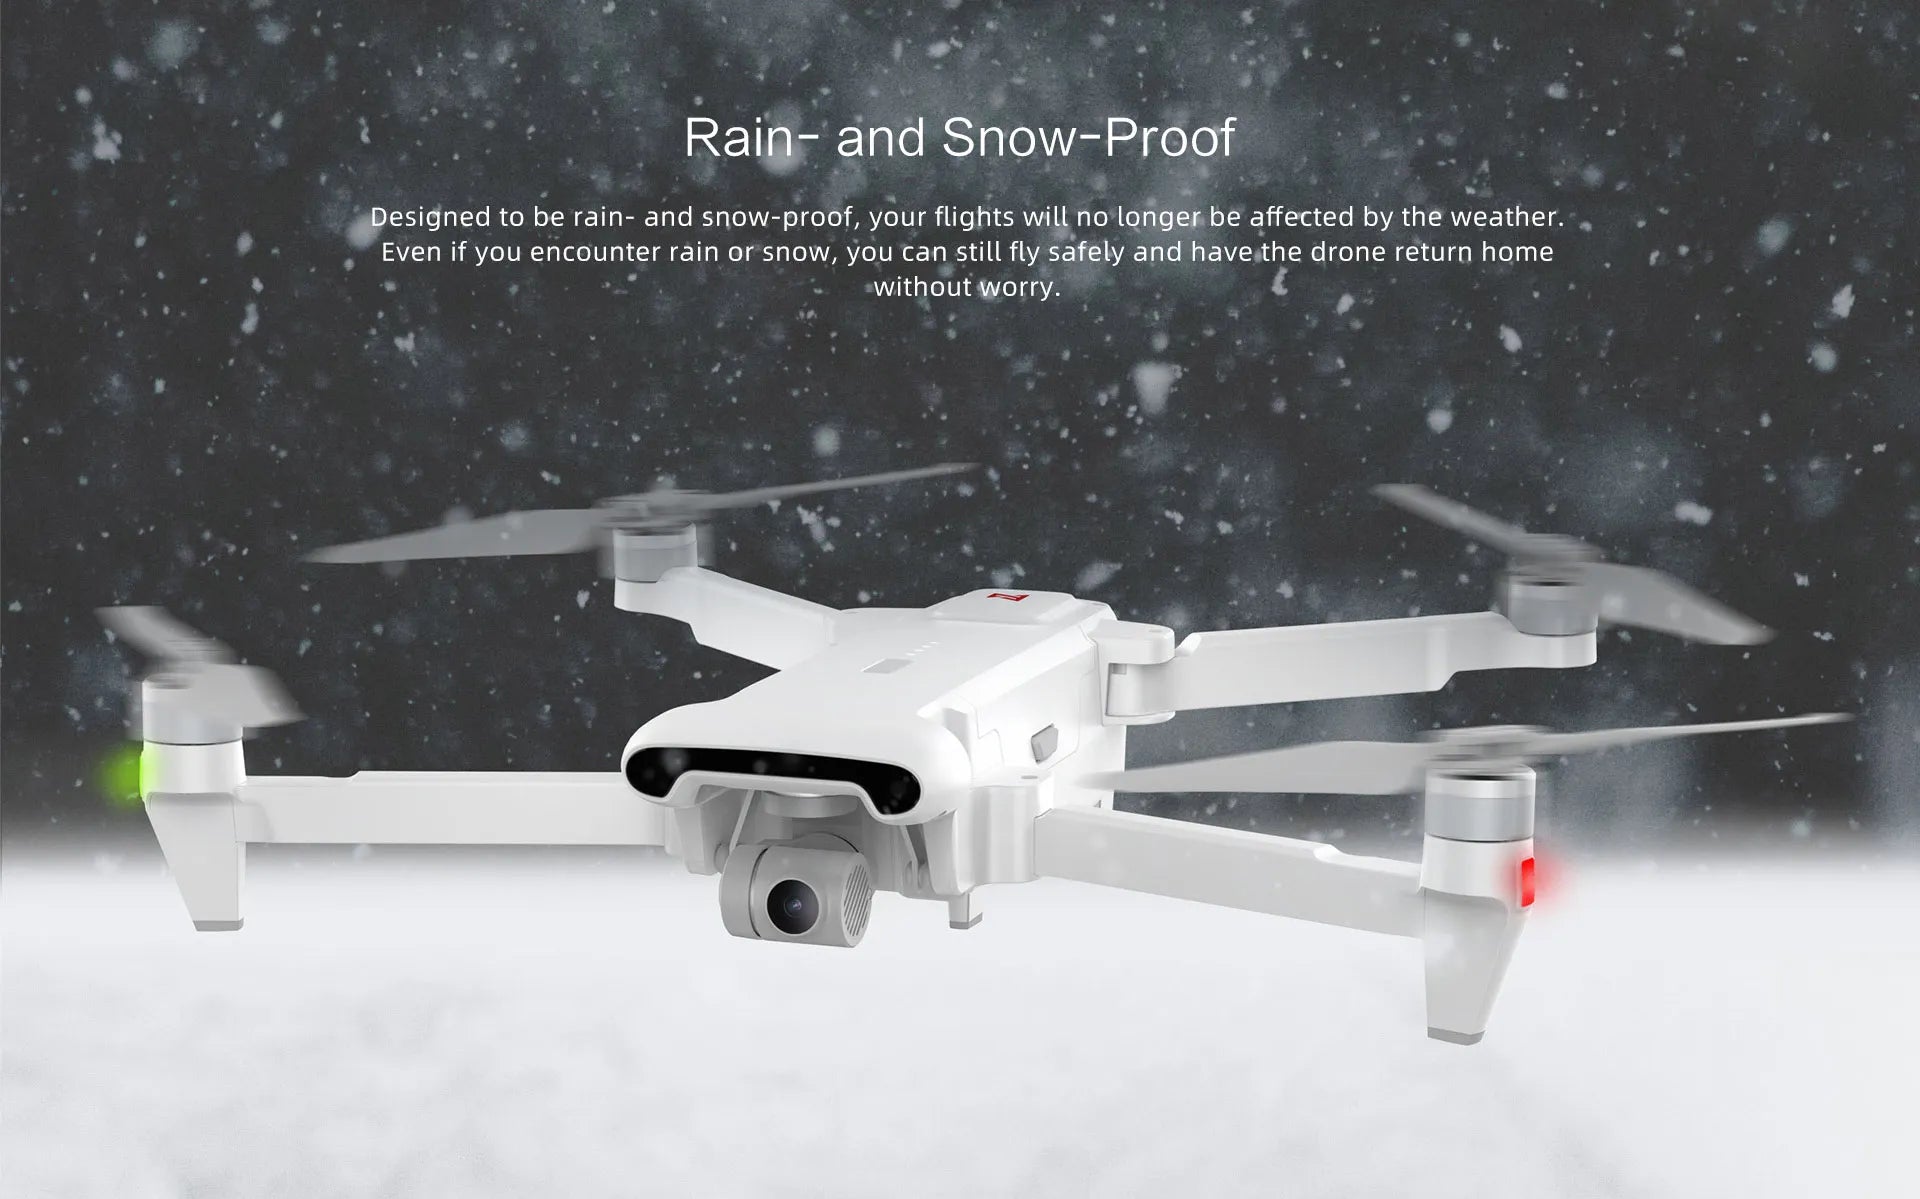 FIMI X8SE 2022 Drone, Designed to be rain- and snoW-proof, your flights will no